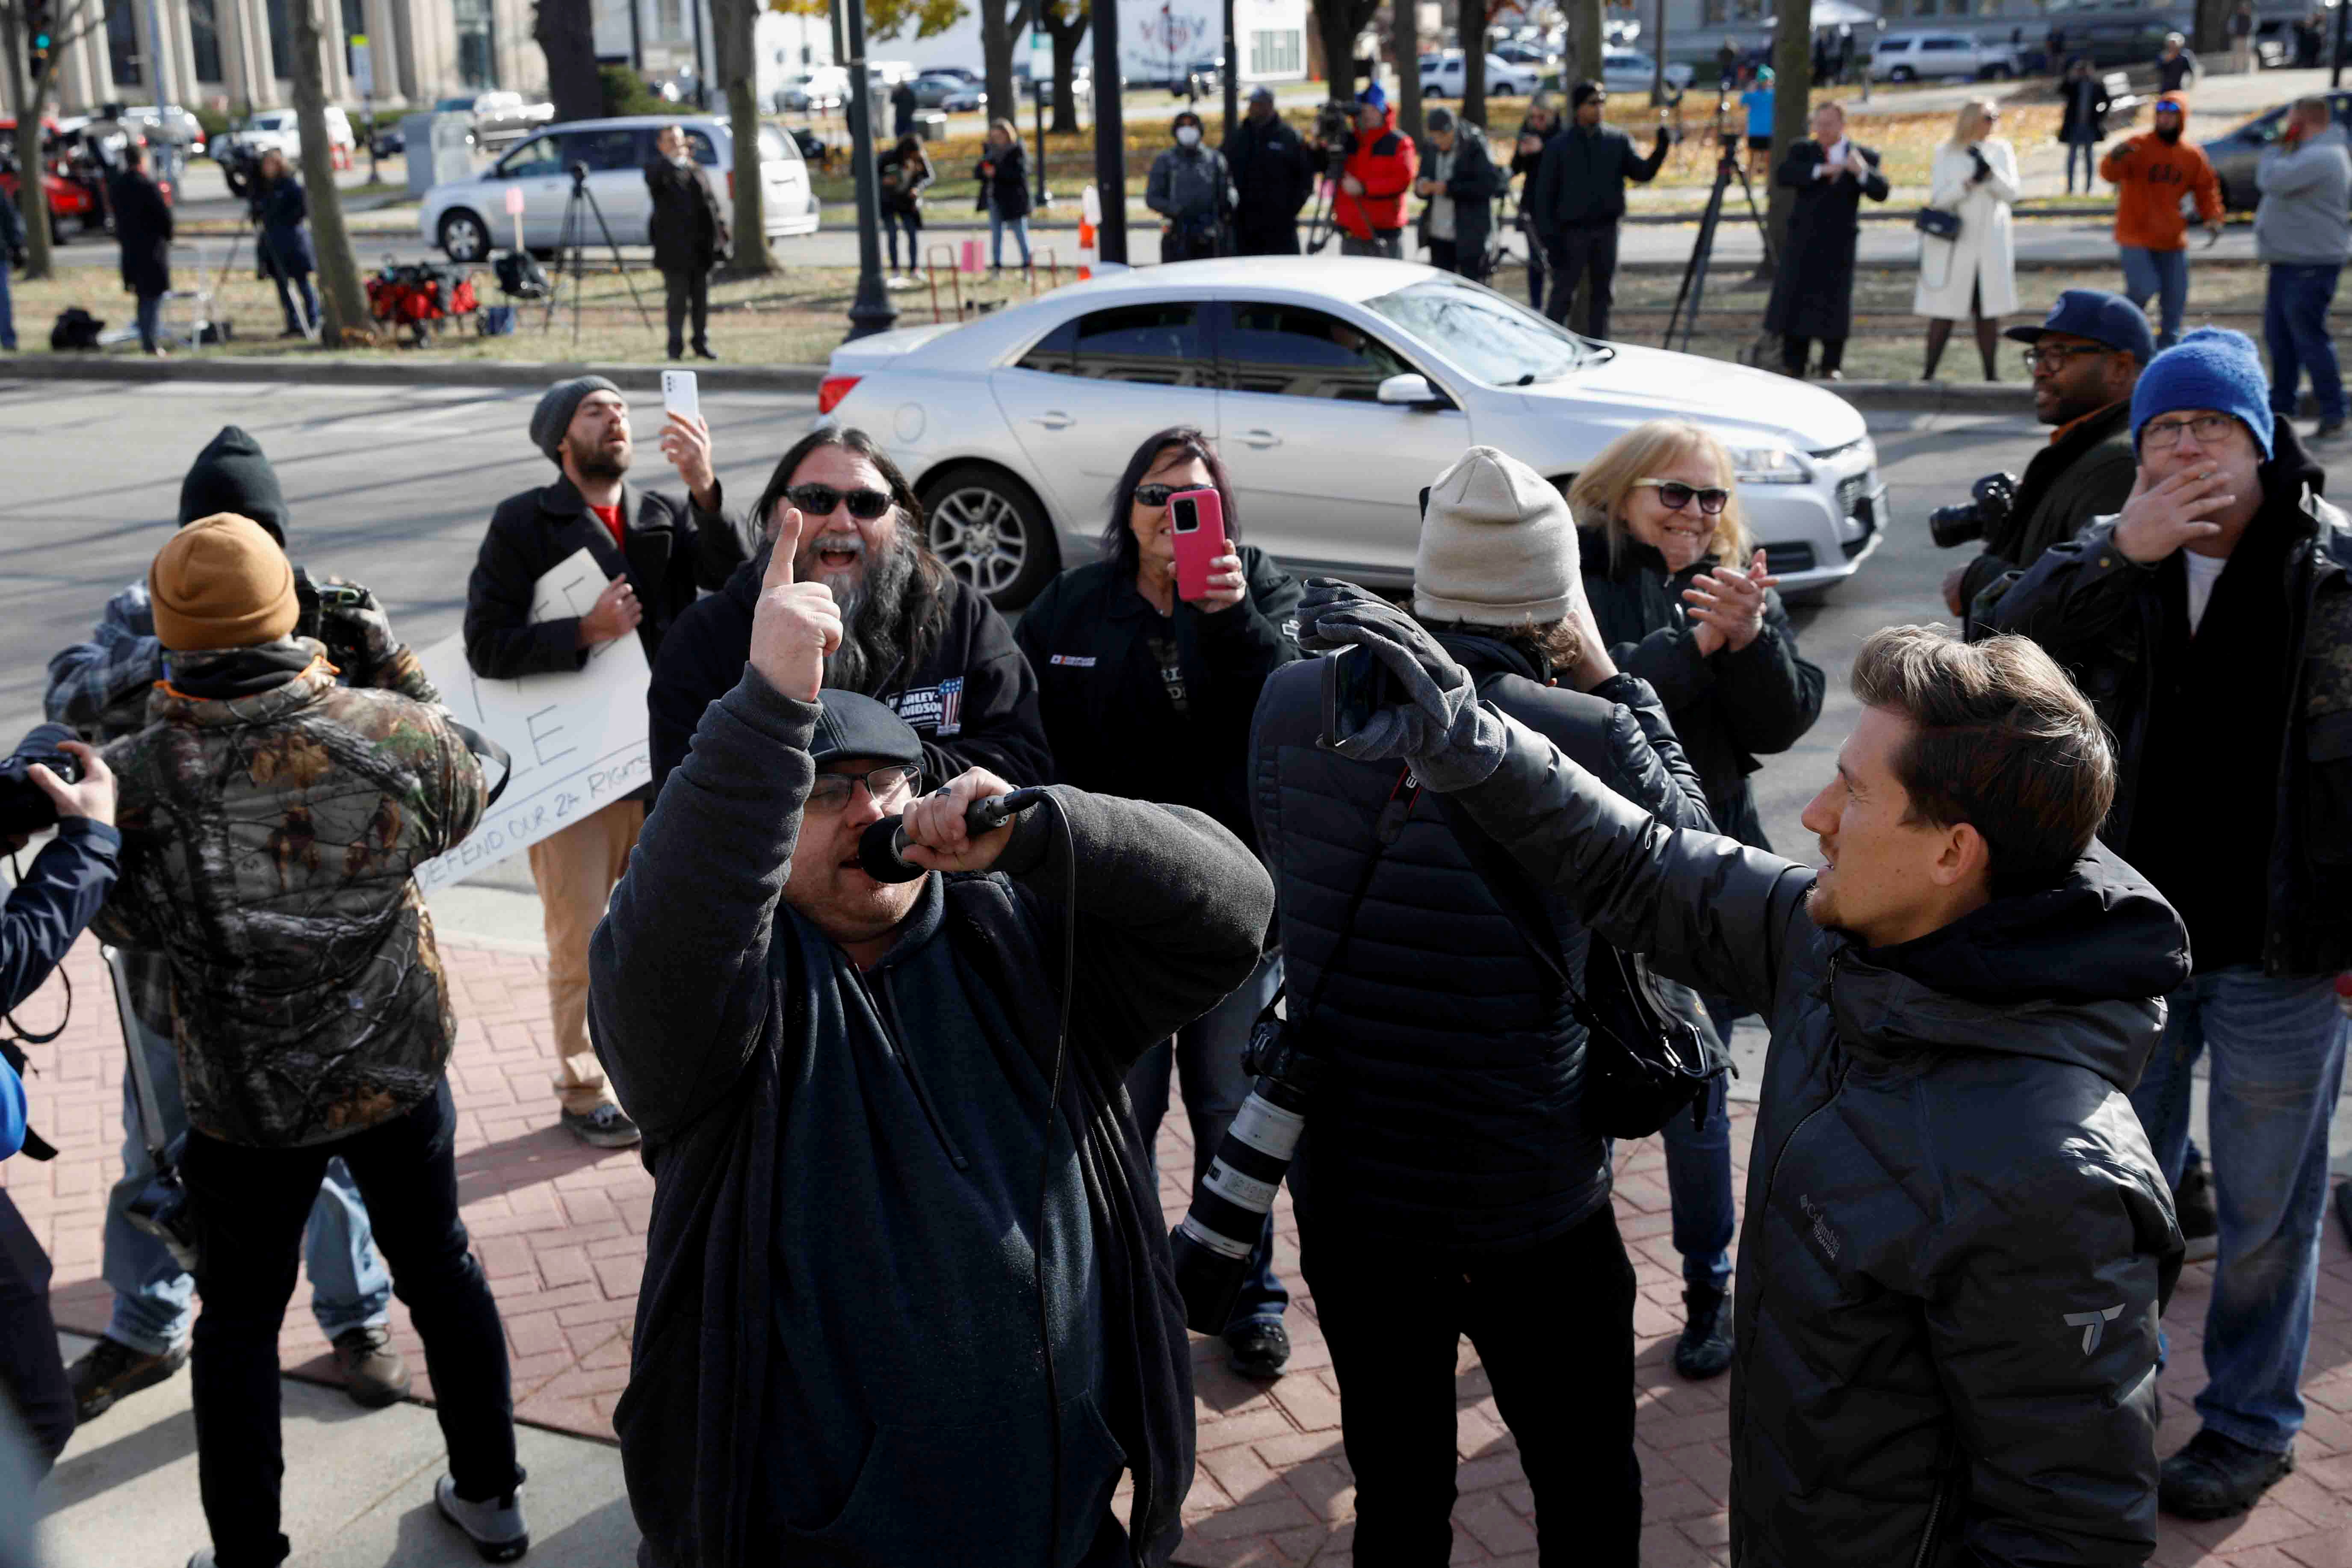 People react to the verdict in the trial of Kyle Rittenhouse, outside the Kenosha County Courthouse in Kenosha, Wisconsin, U.S., November 19, 2021. REUTERS/Brendan McDermid